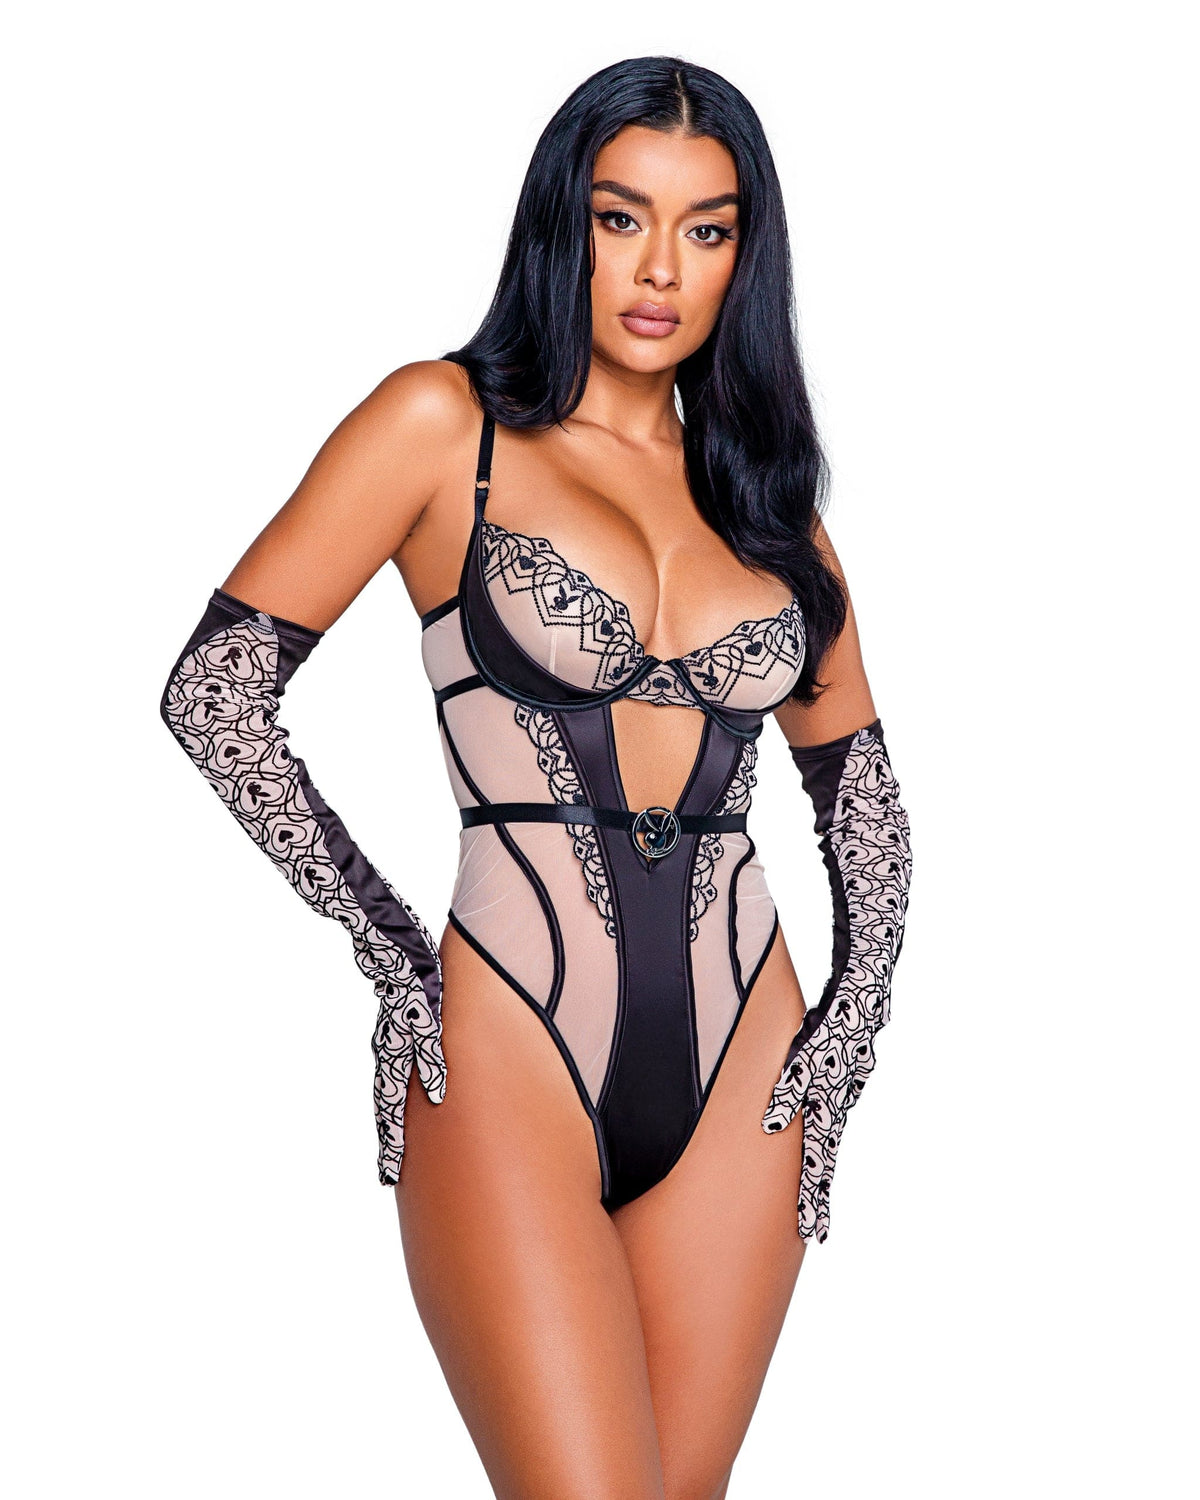 Roma Nude Sheer Mesh Playboy Underwire Top Thong Teddy w/ Logo (Plus Size Available) 2024 Sexy Playboy Pink Sheer Mesh Underwire Thong Teddy Lingerie  Apparel &amp; Accessories &gt; Clothing &gt; Underwear &amp; Socks &gt; Lingerie